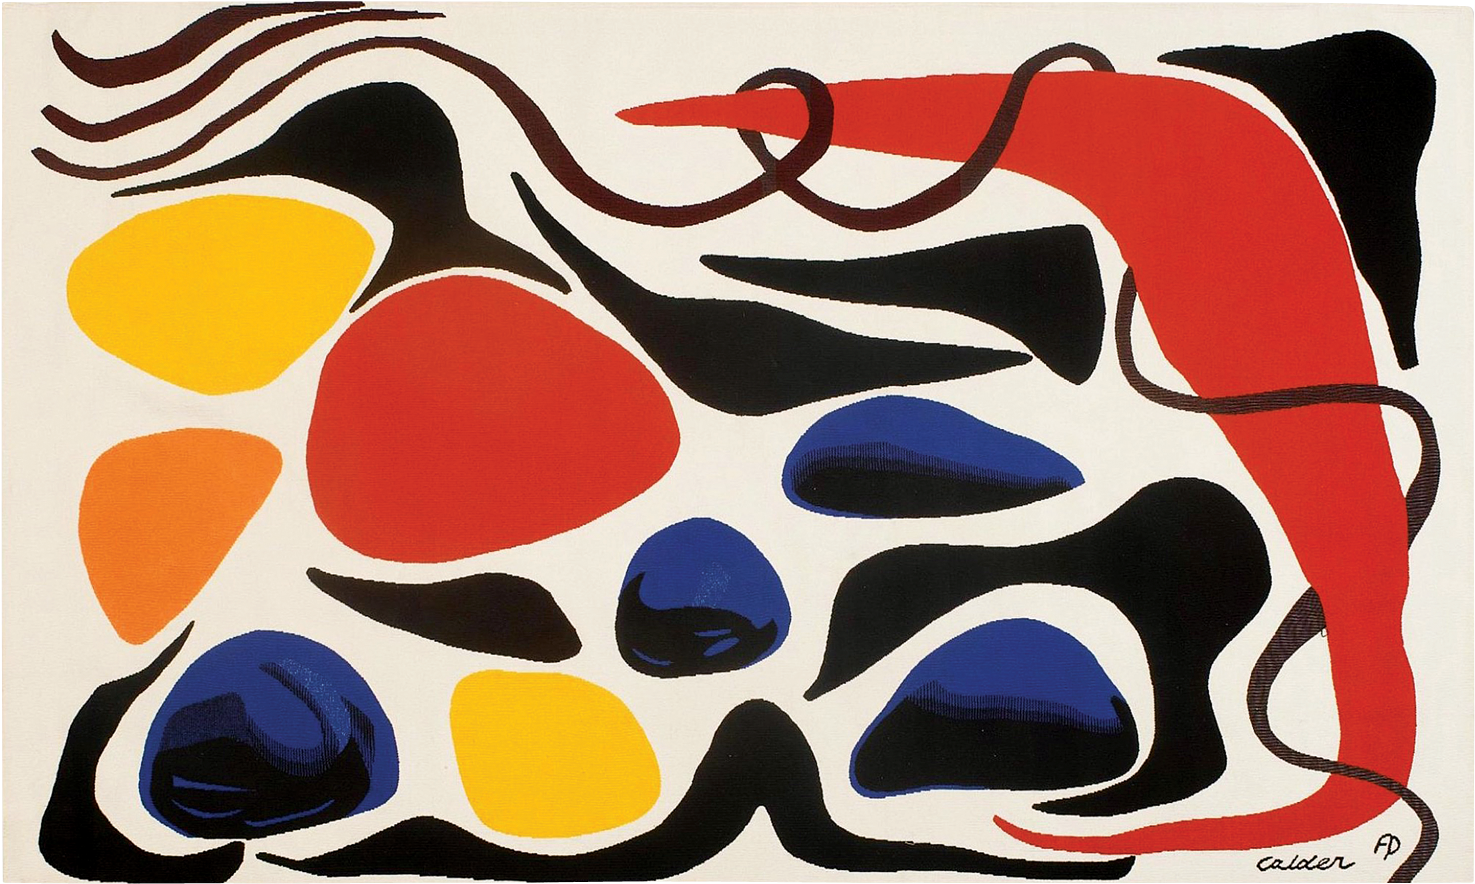 A Colorful Art Piece With Black Red Blue And Yellow Shapes